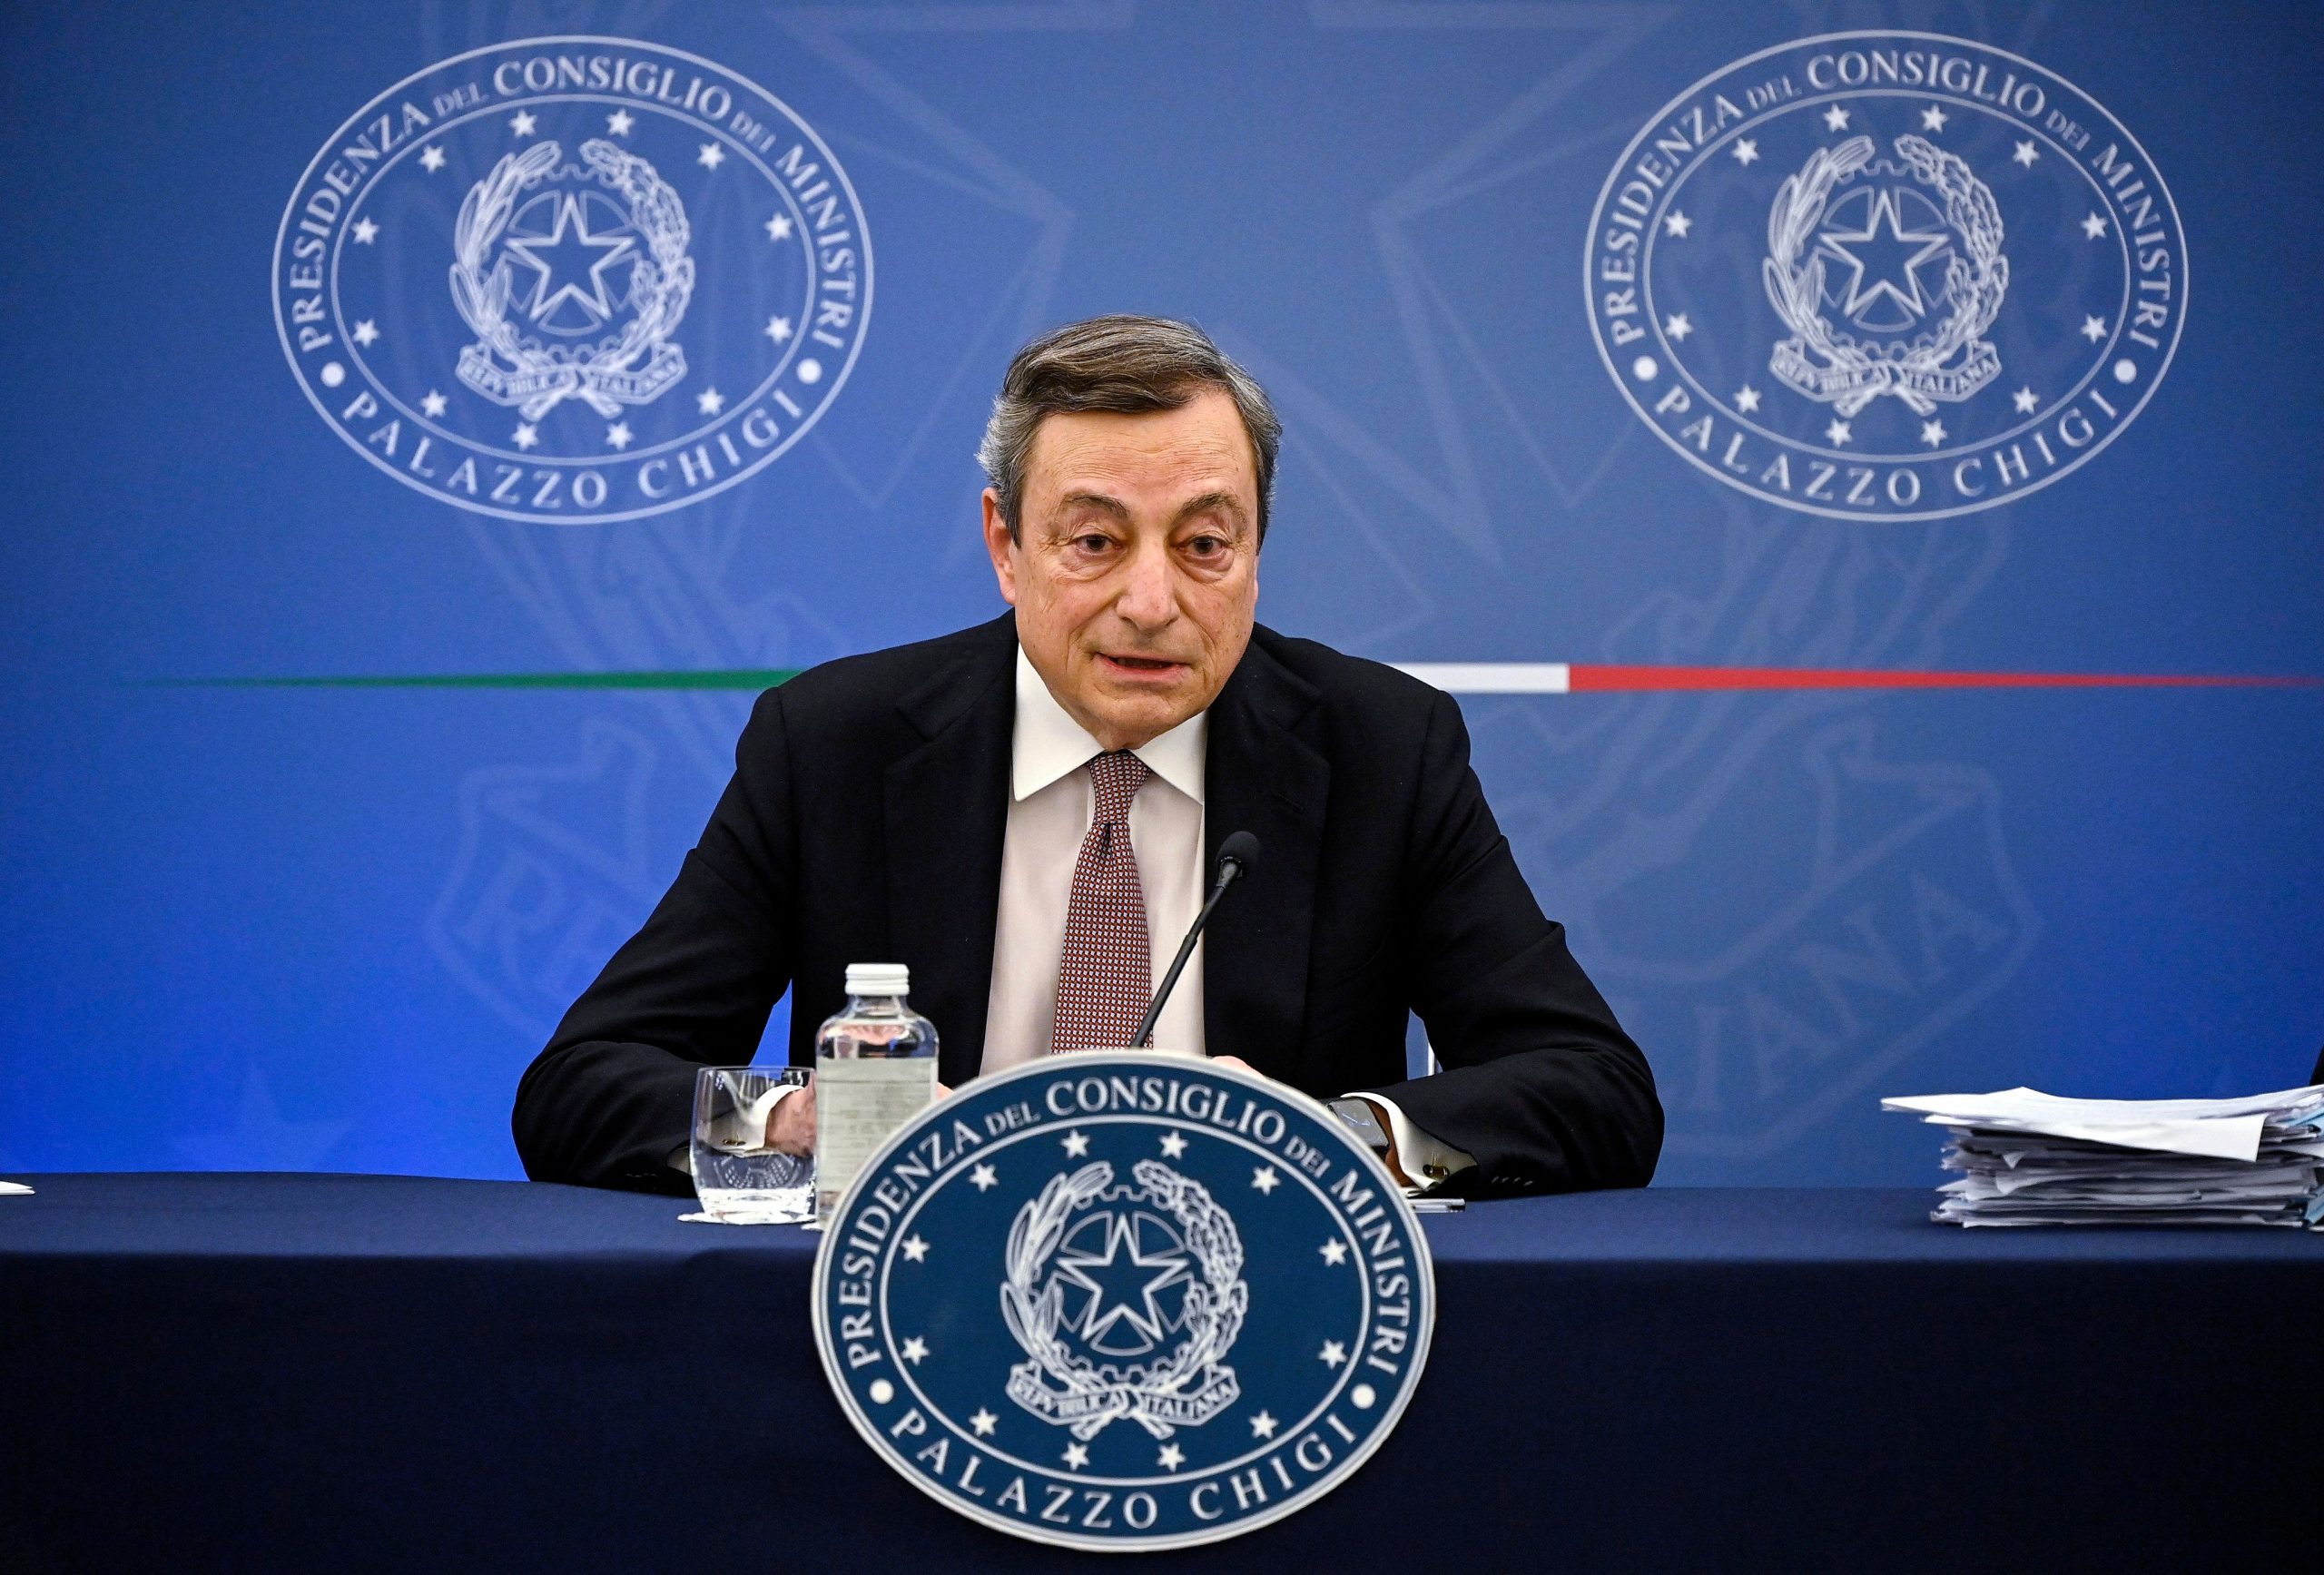 Who is Mario Draghi?